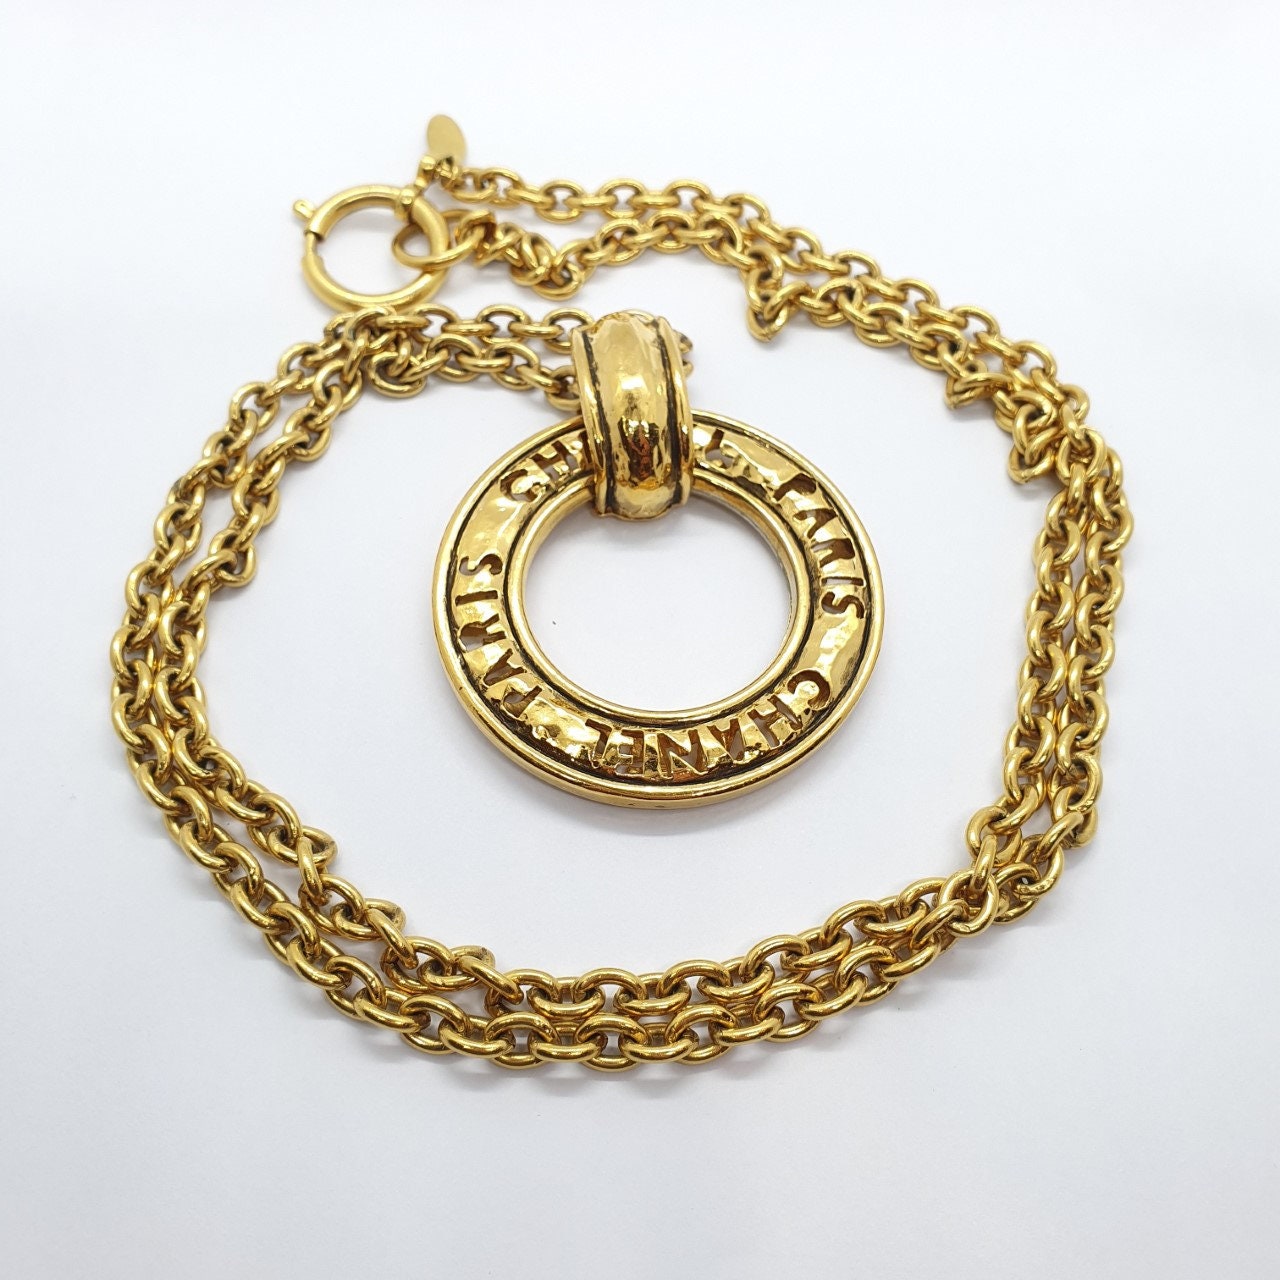 Buy Chanel Long Chain Online In India -  India